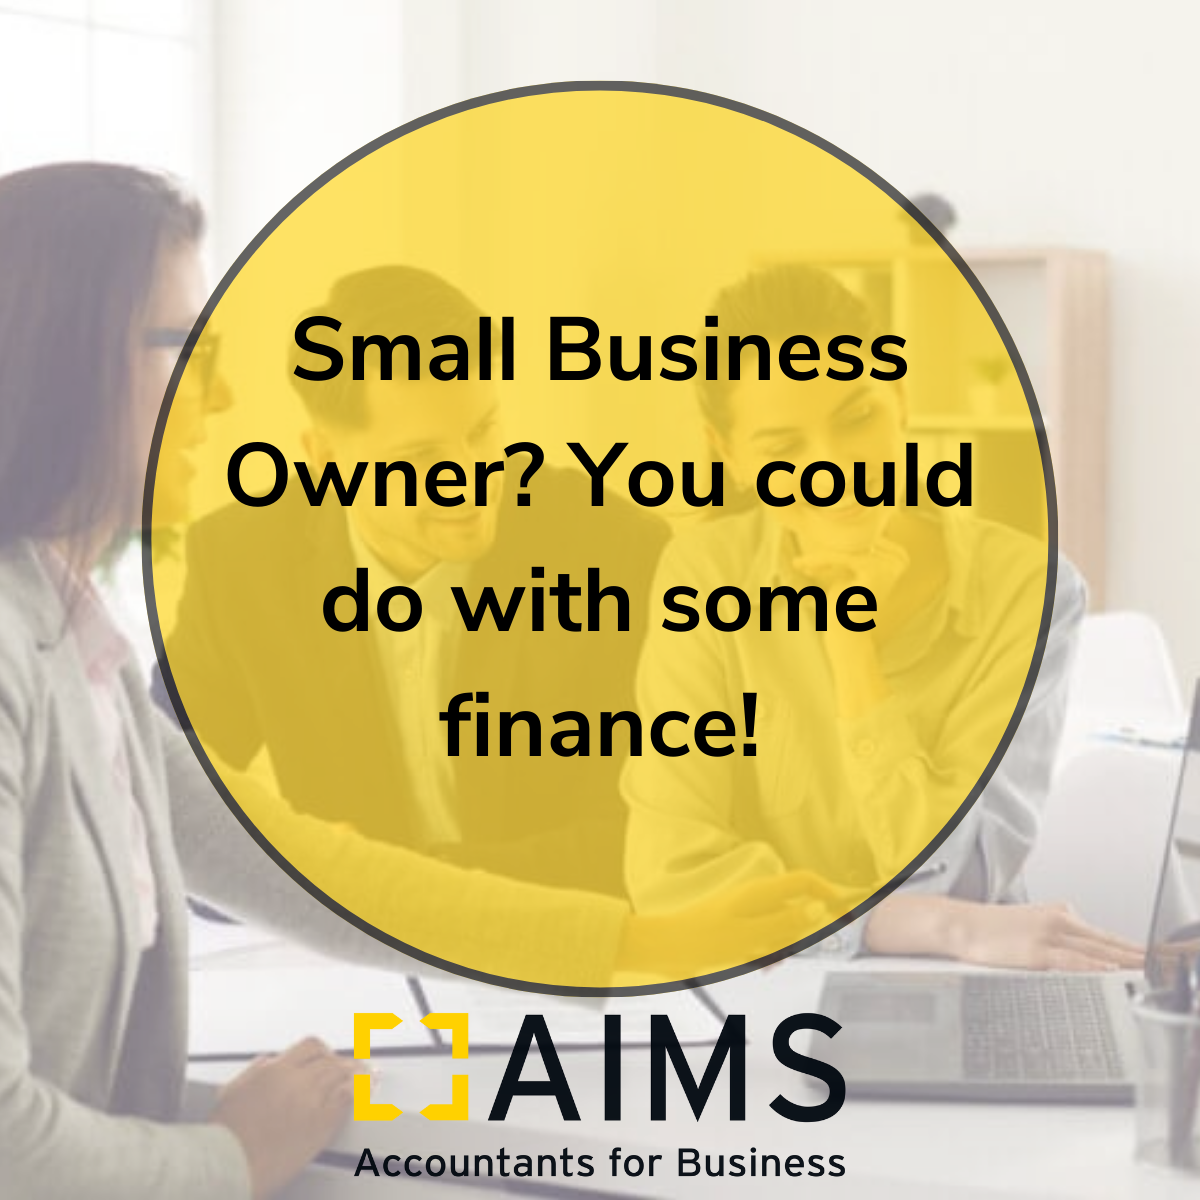 small business owner finance title image